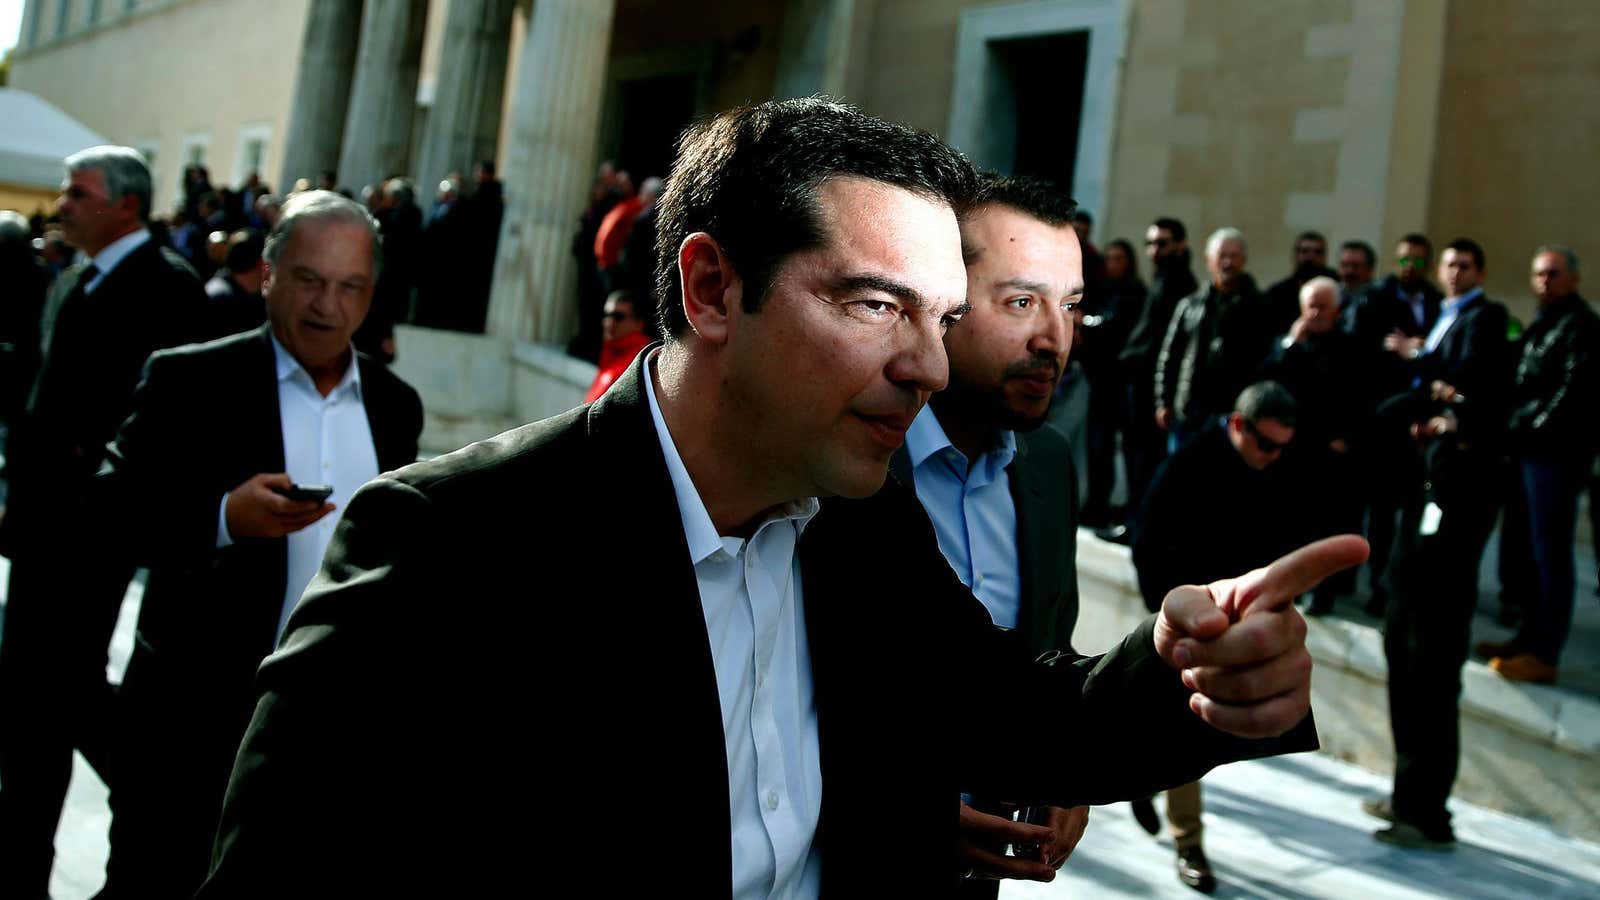 Will Syriza leader Alexis Tsipras see the light?